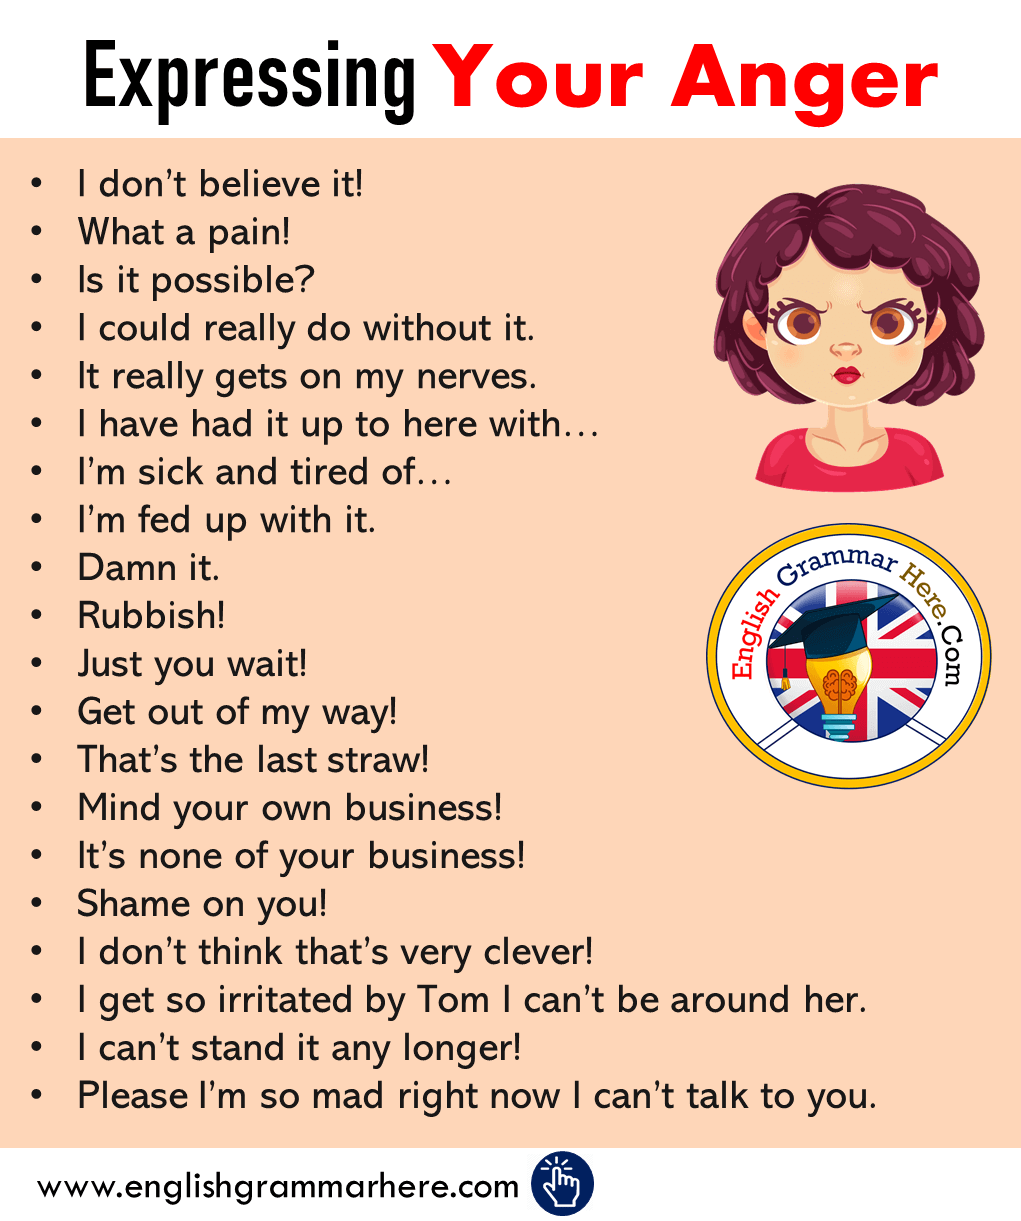 Expressing Your Anger in English, How to Express You Anger